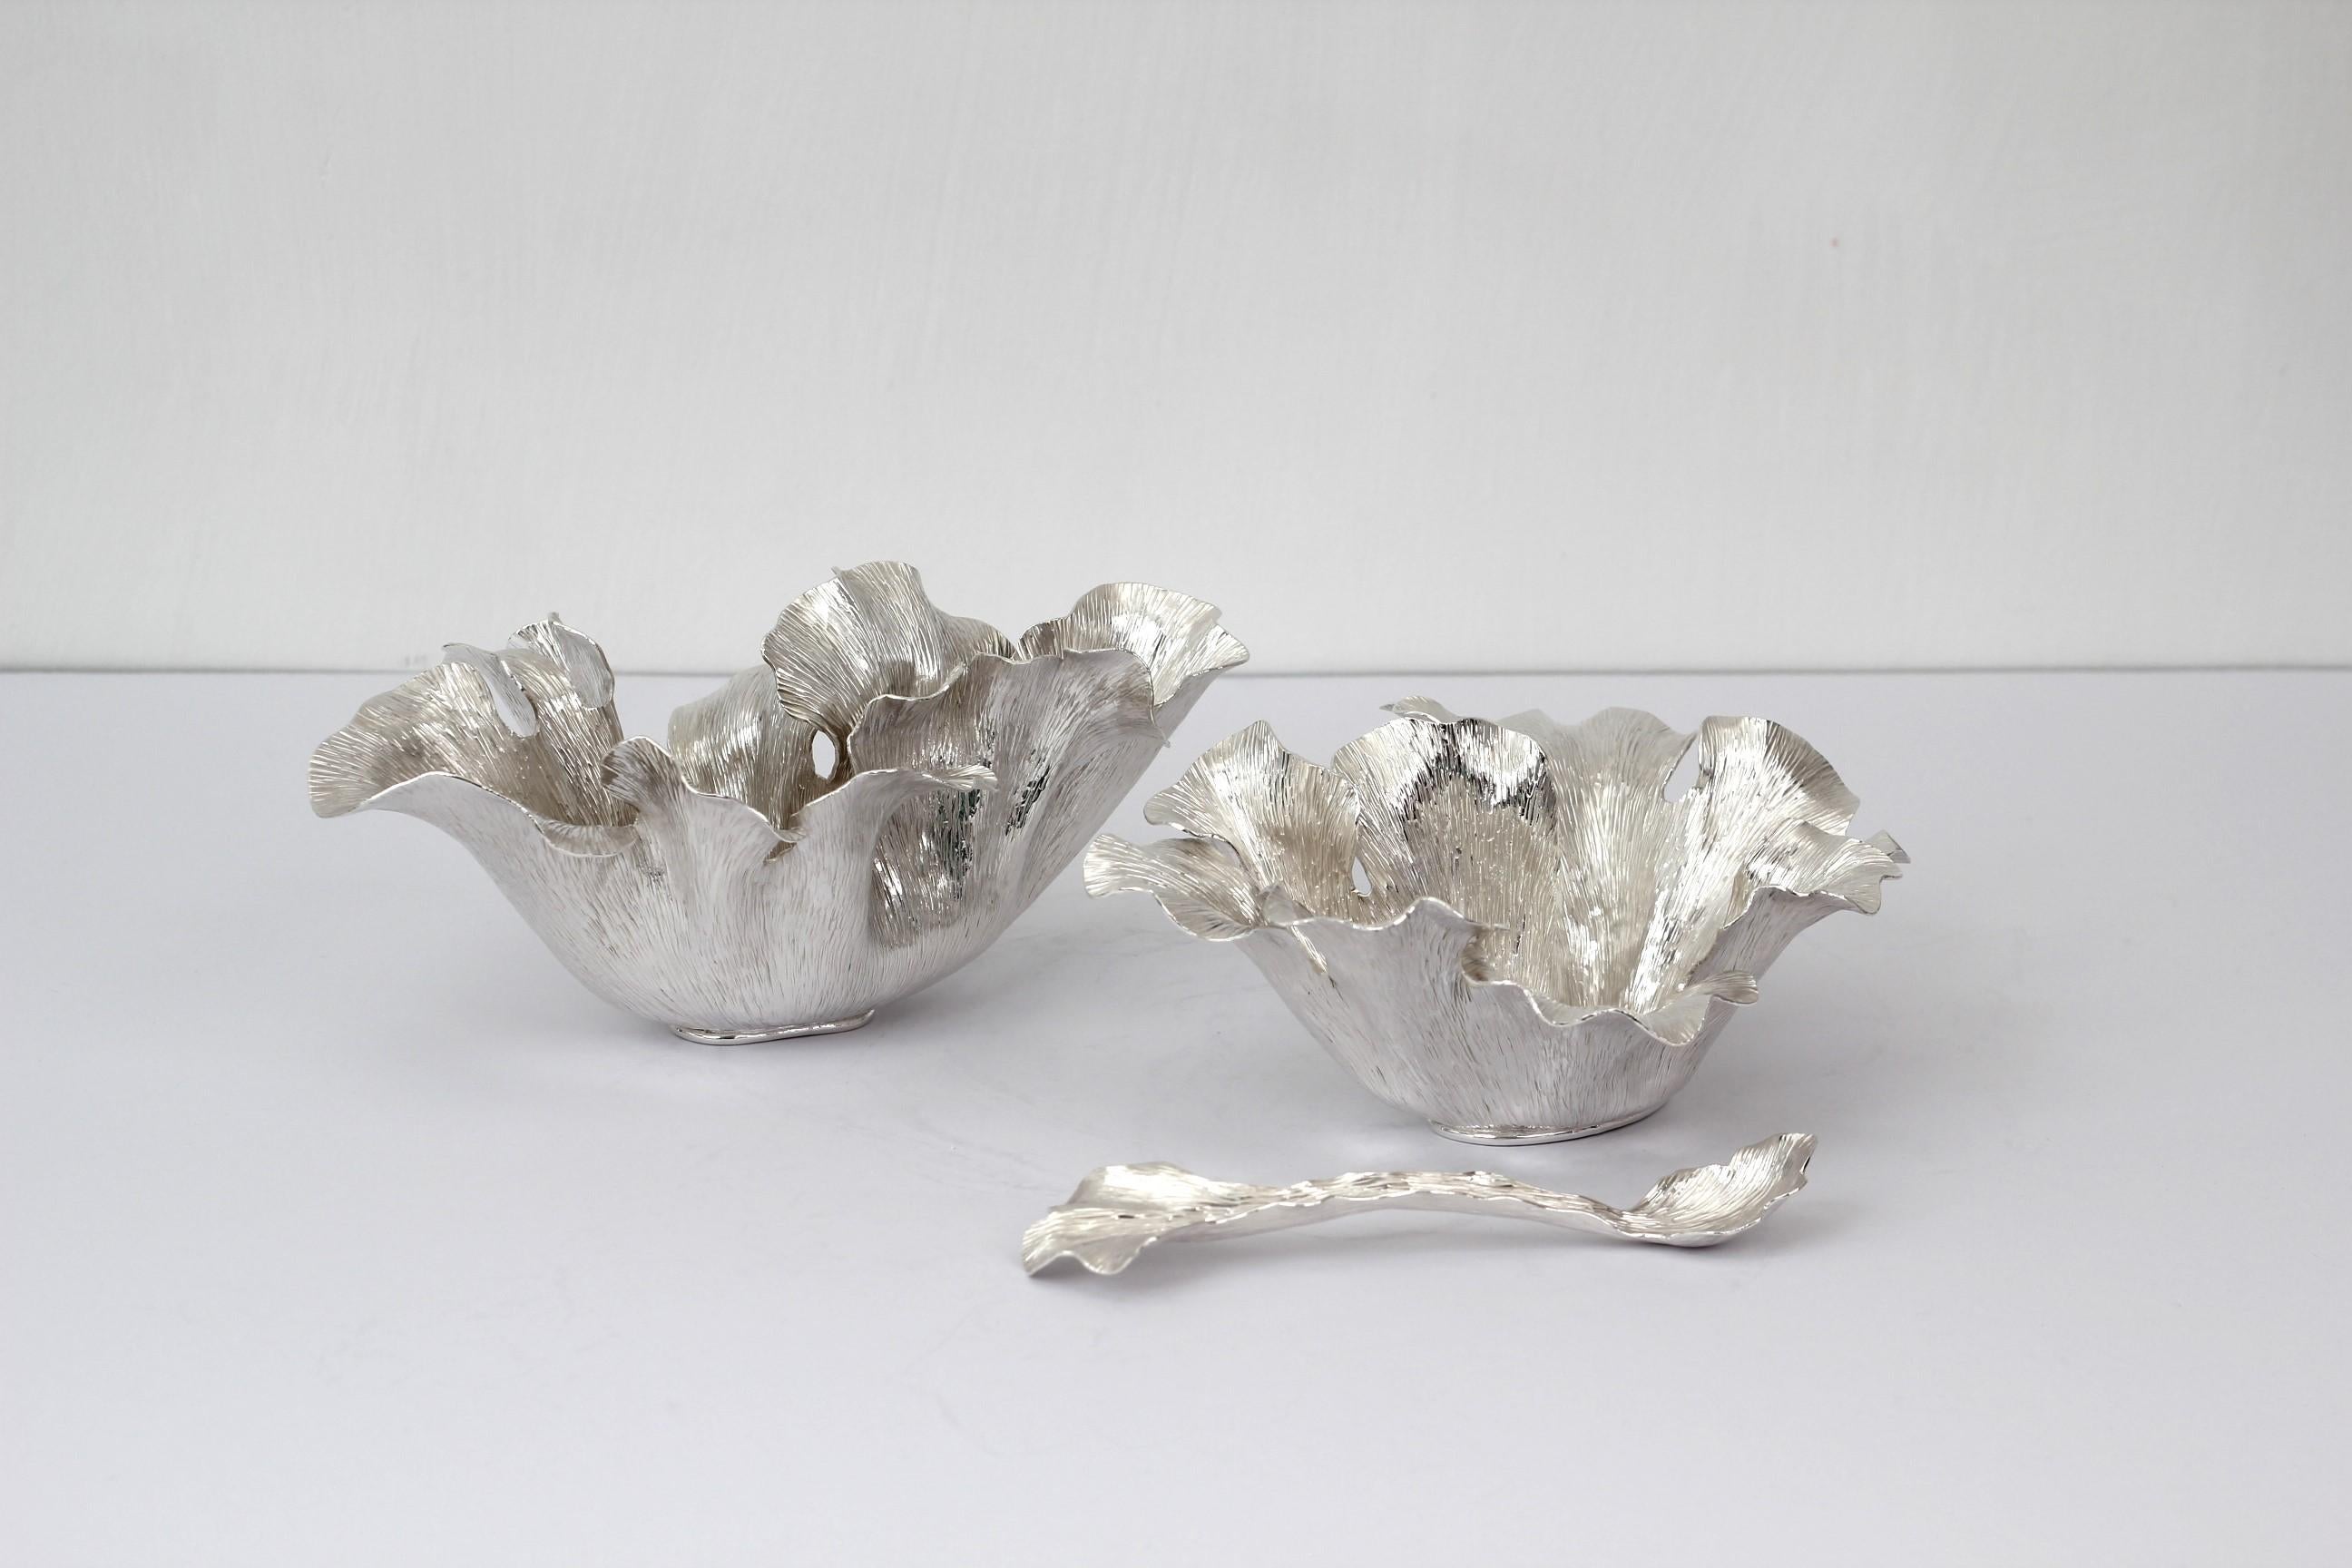 Inspired by the movement and flow of the sea anemone, this organic creamer and sugar set is made out of Silver .950

100% hand made by expert craftsmen, each sheet of metal is hand hammered, cut and bent using metal and wood as a last to give each